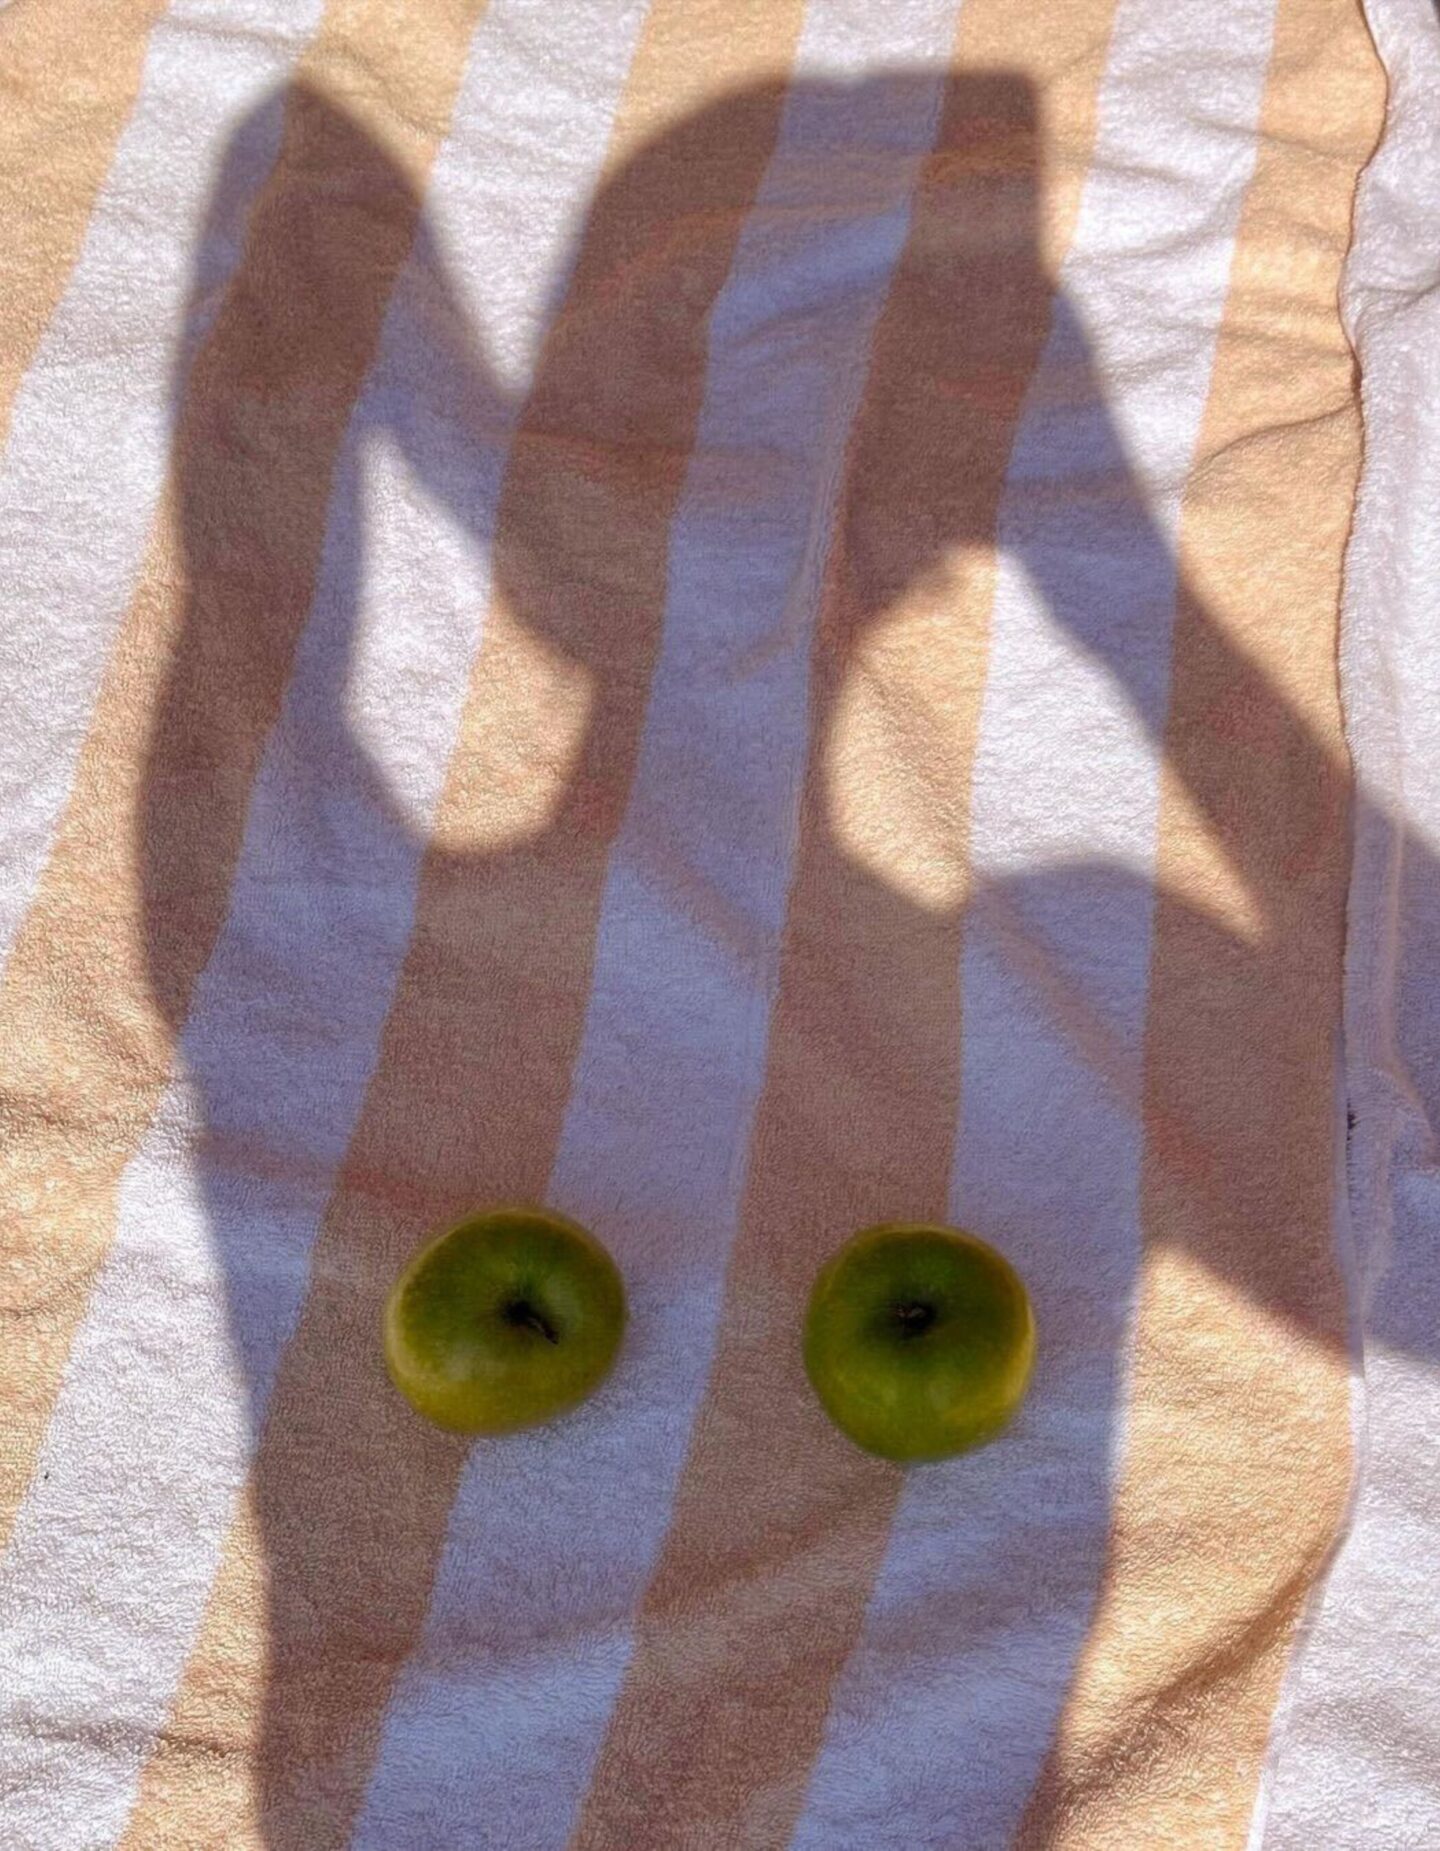 Limes as boobs on towel